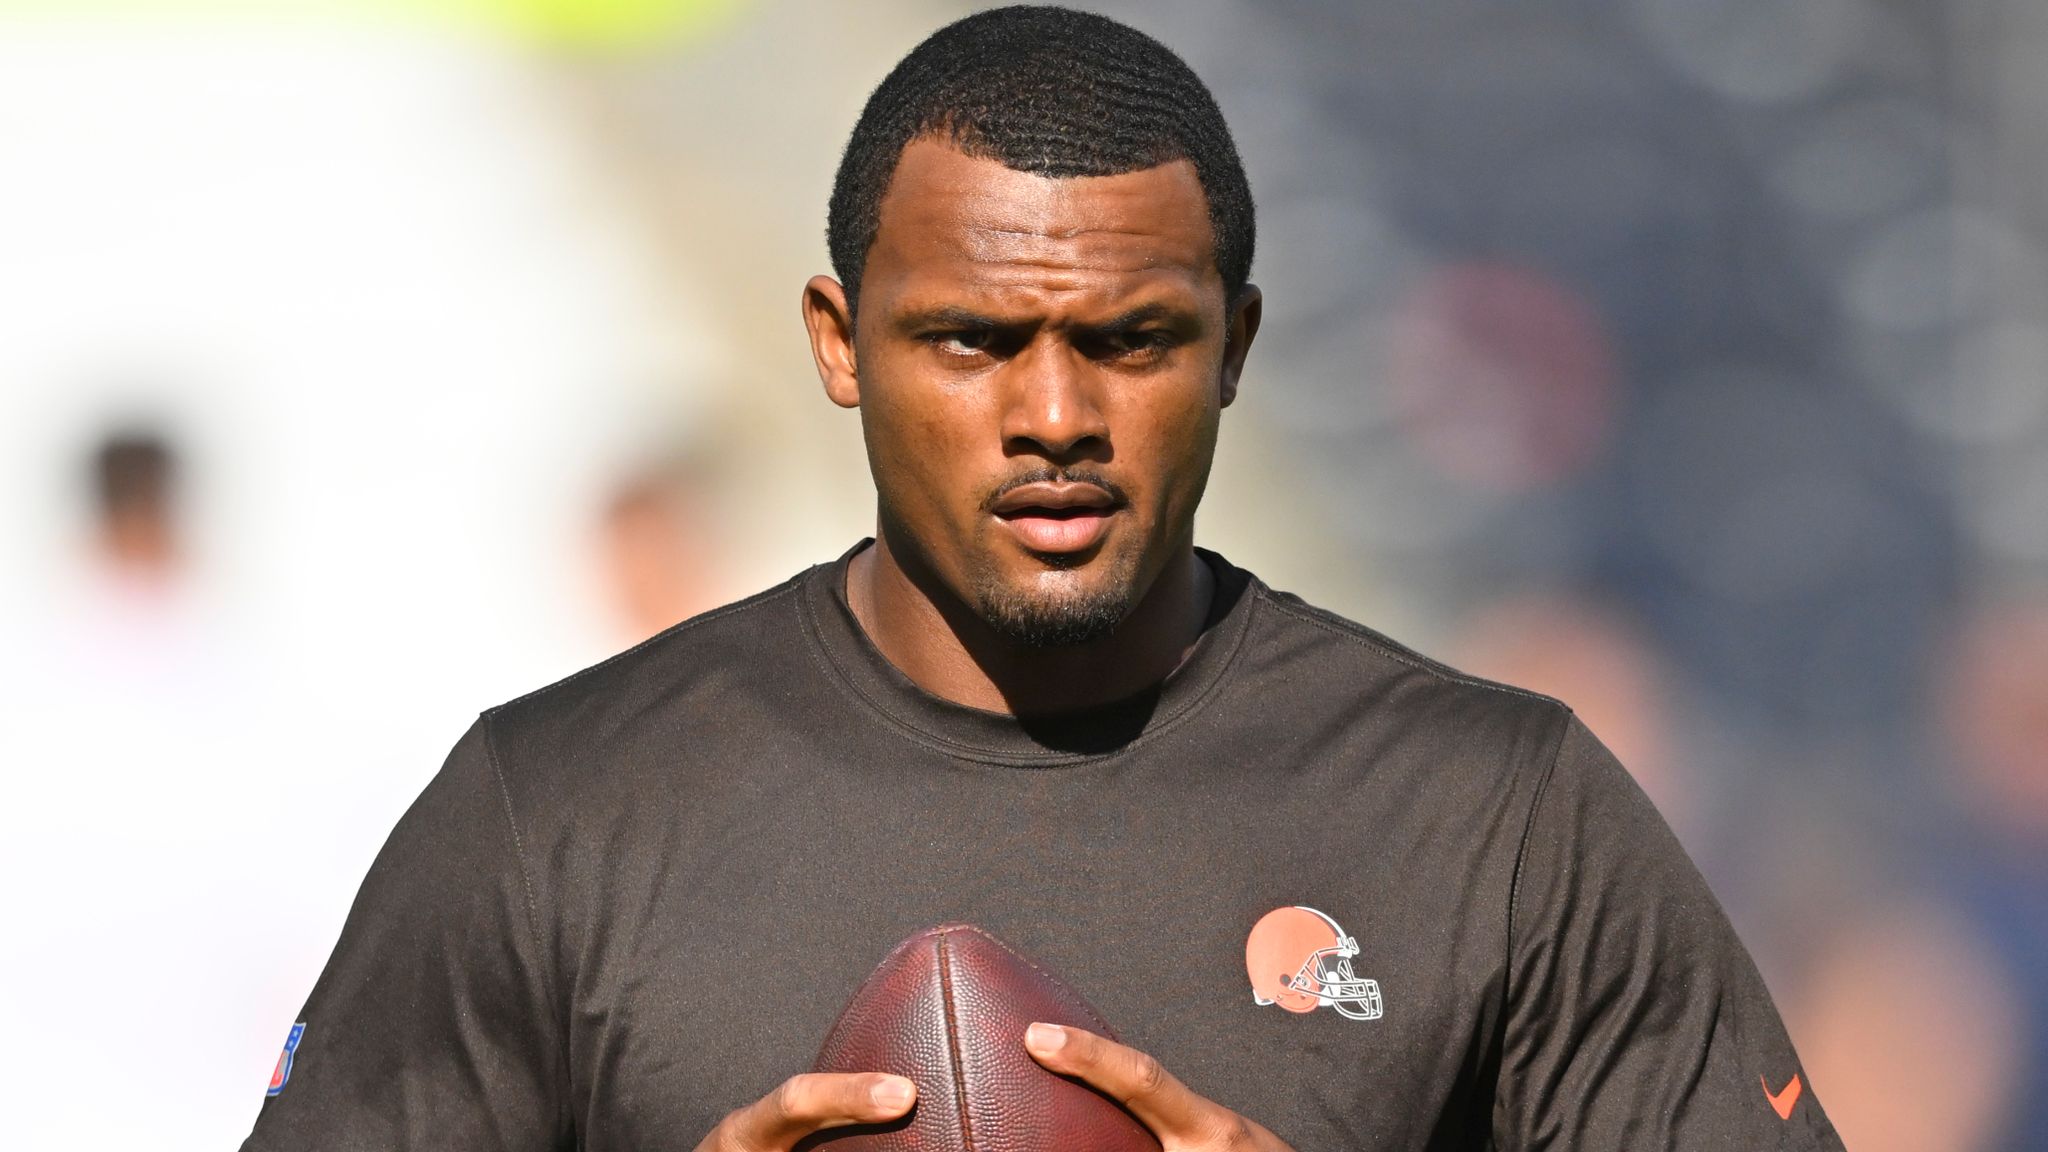 Deshaun Watson’s mysterious absence raises concerns and frustration among Cleveland Browns fans.